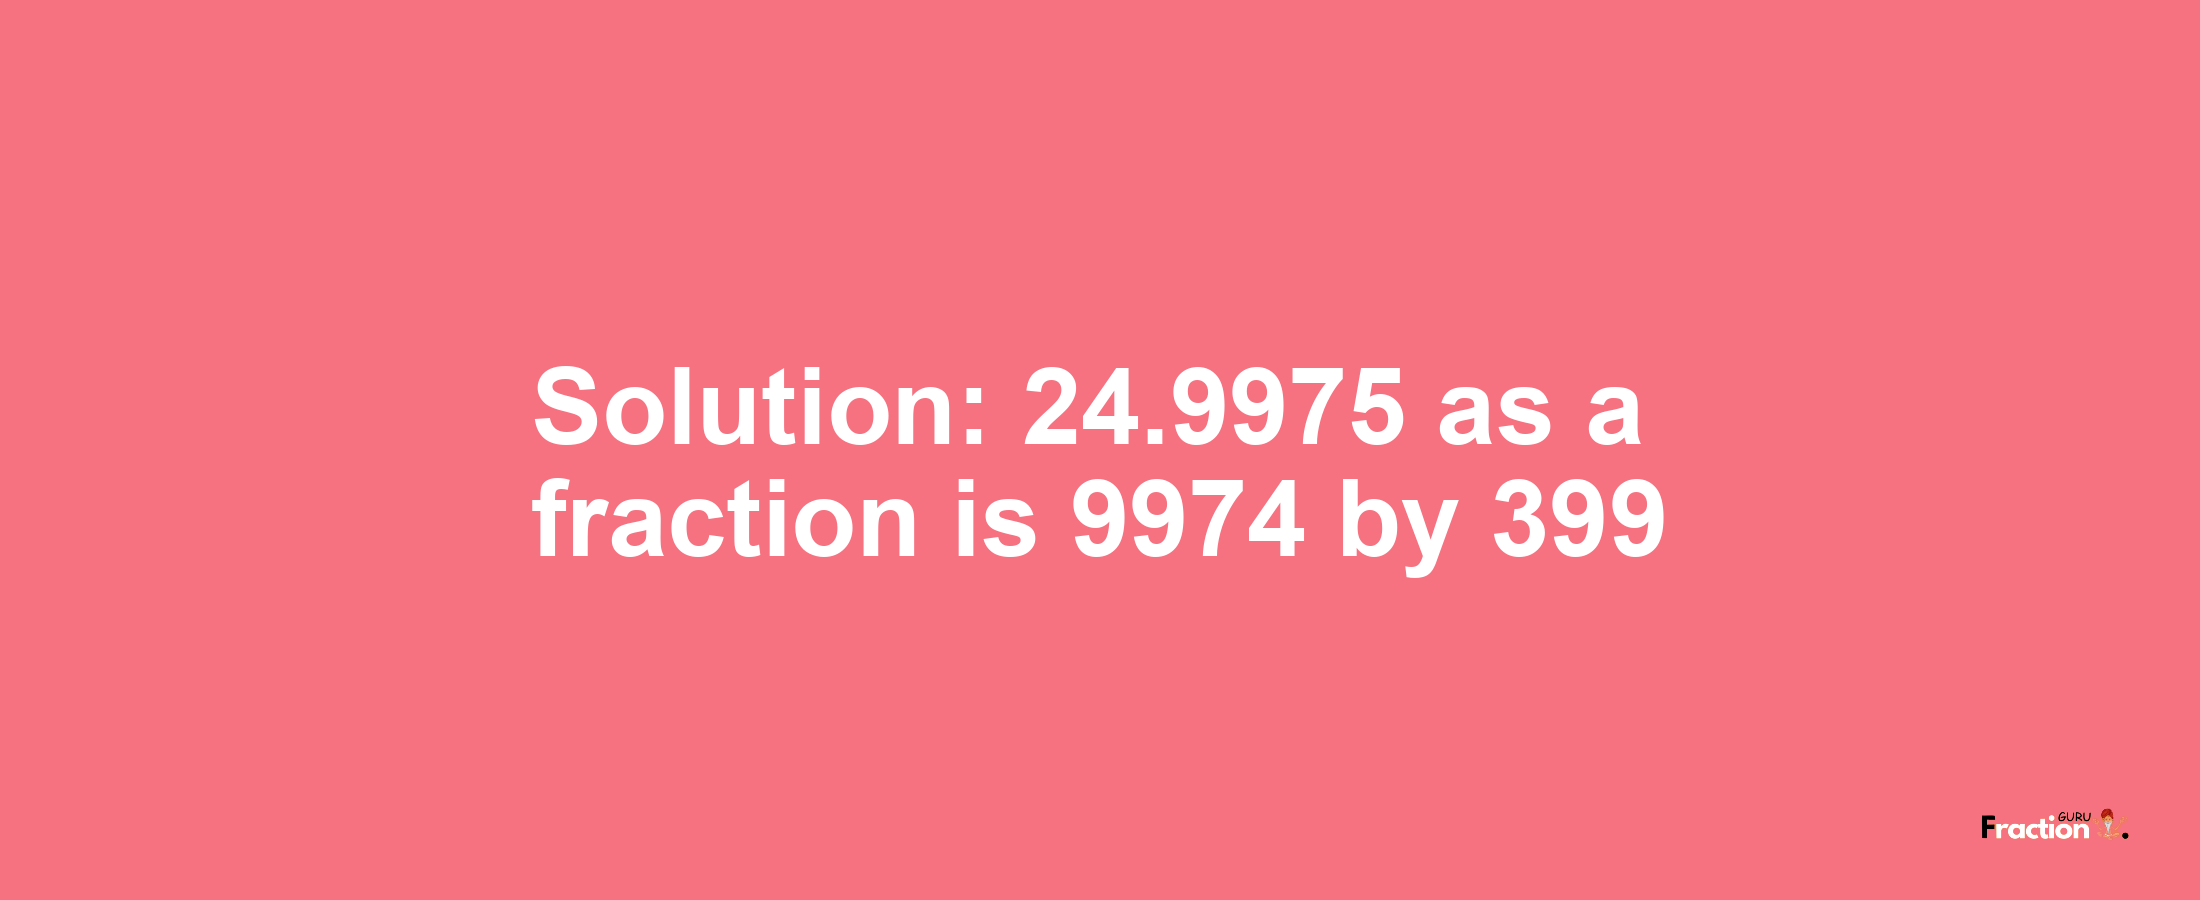 Solution:24.9975 as a fraction is 9974/399